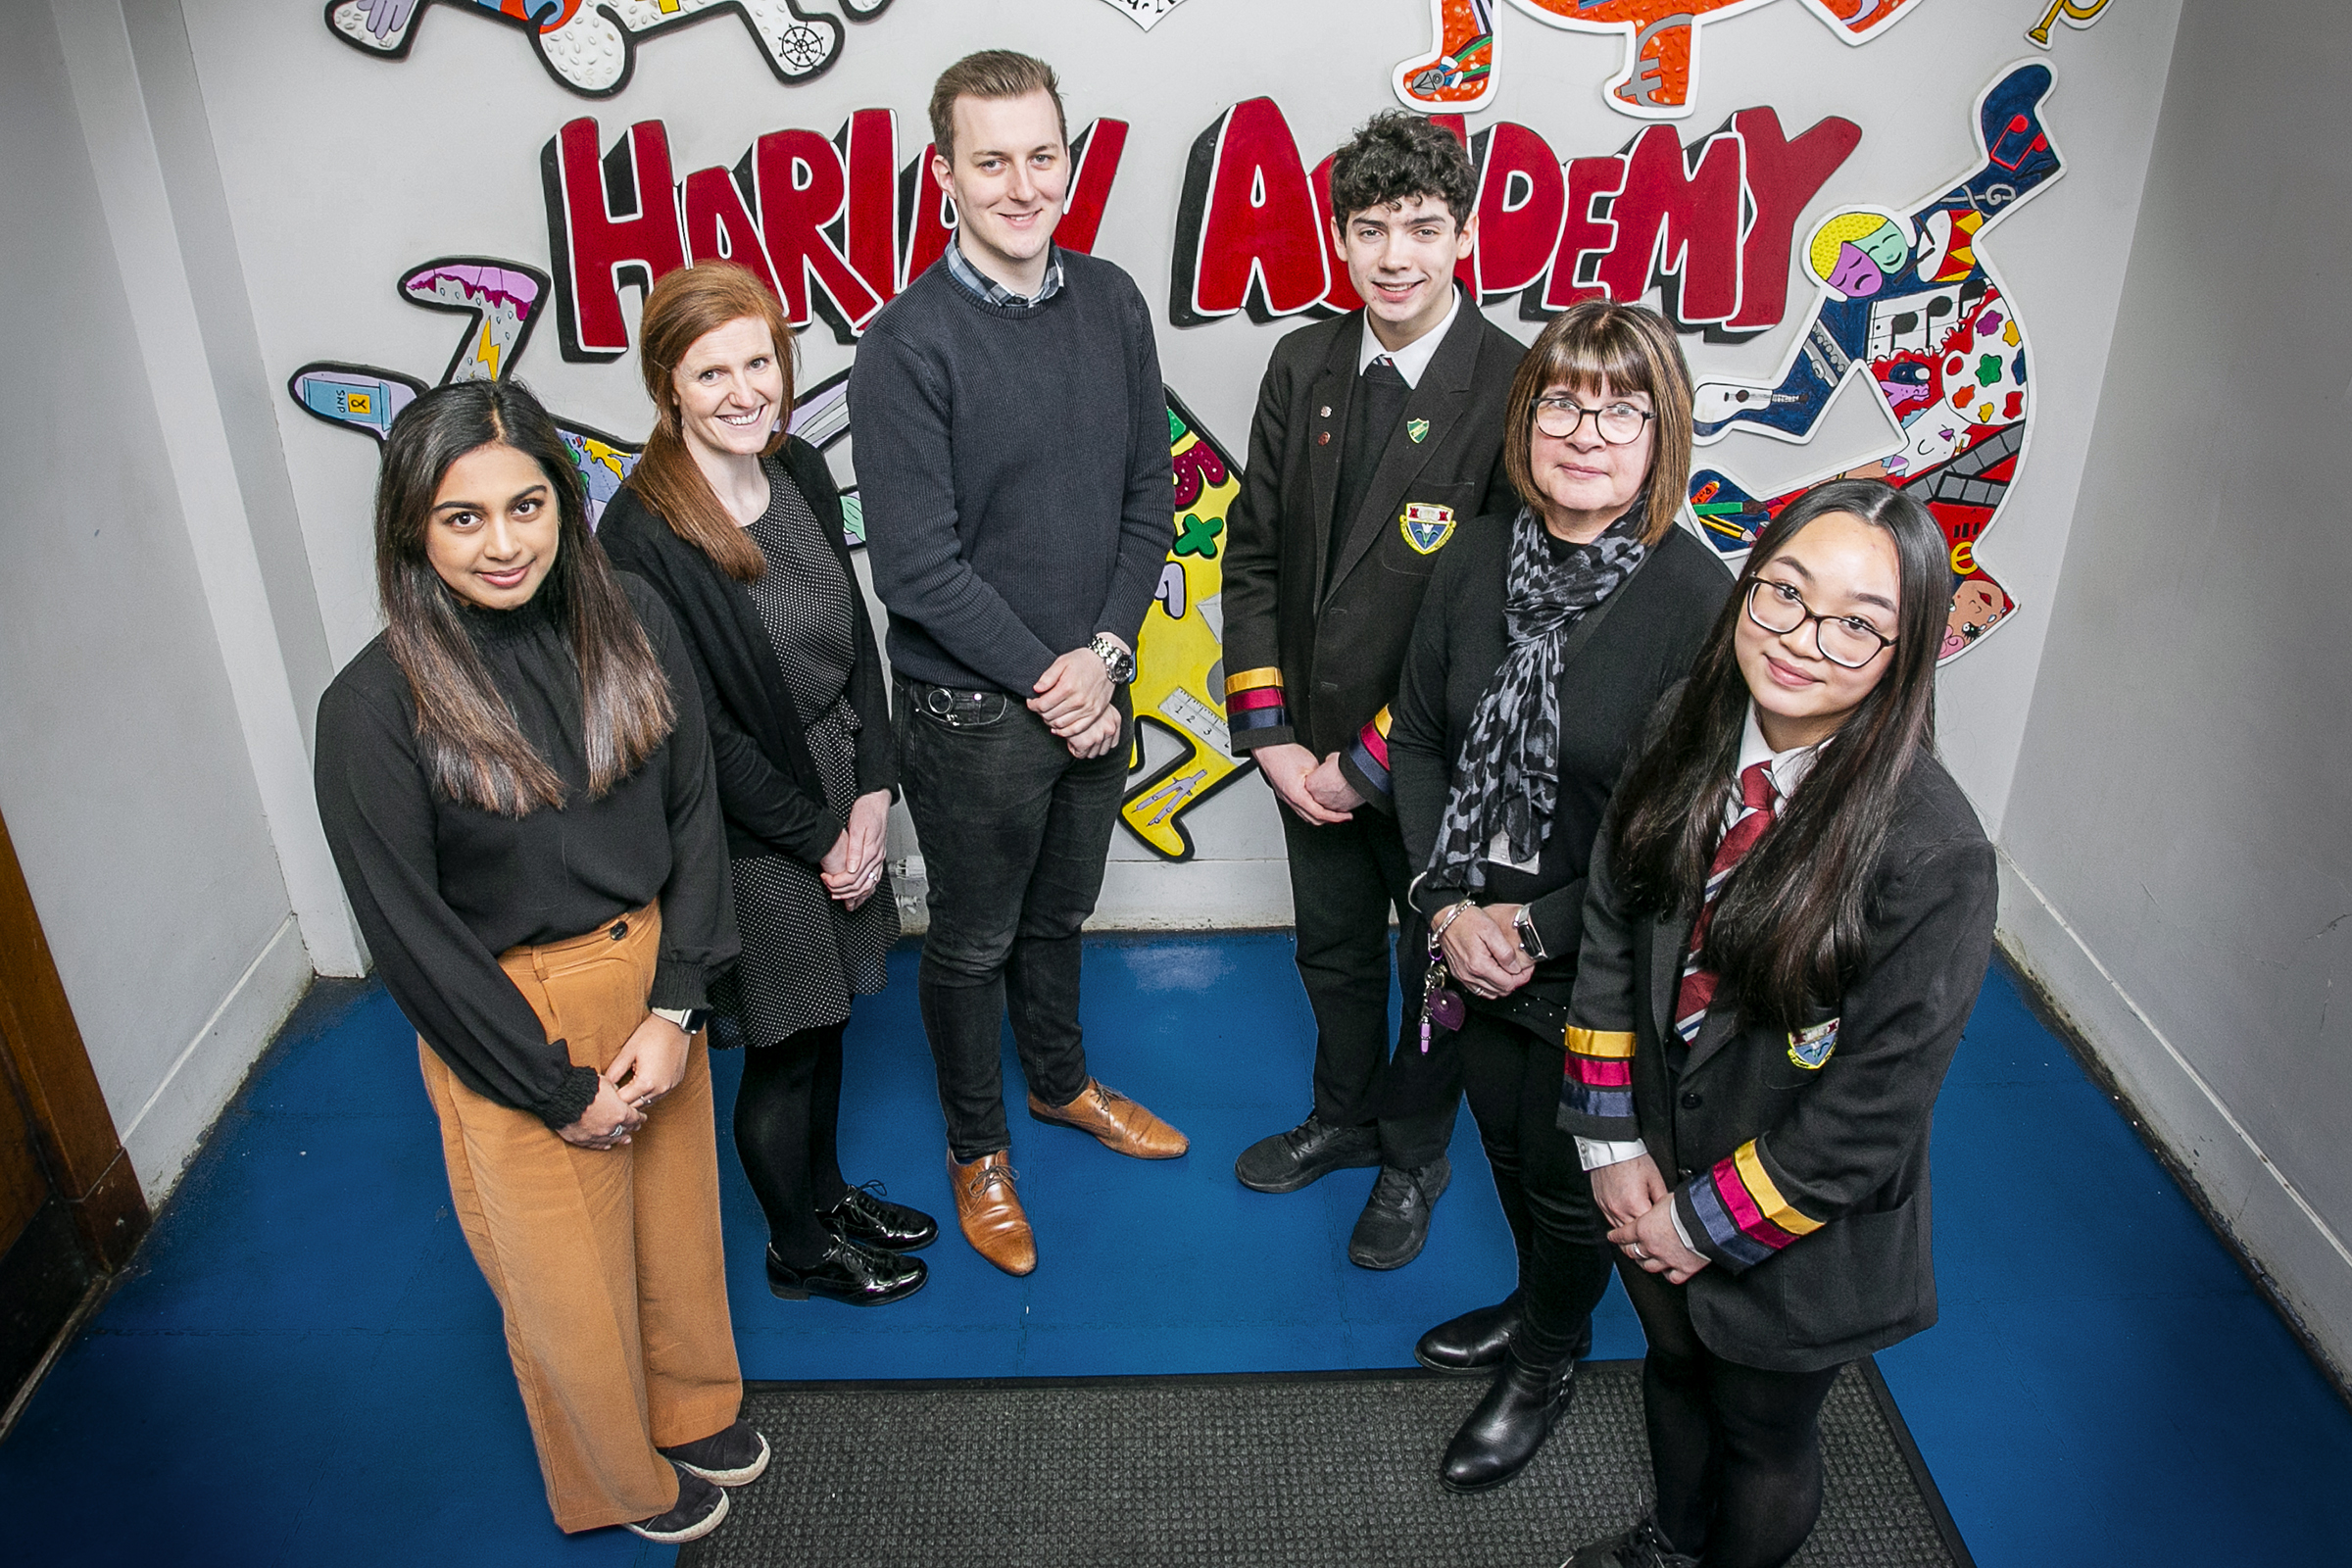 MEMBER NEWS: North-east recruiters help to equip pupils with interview skills